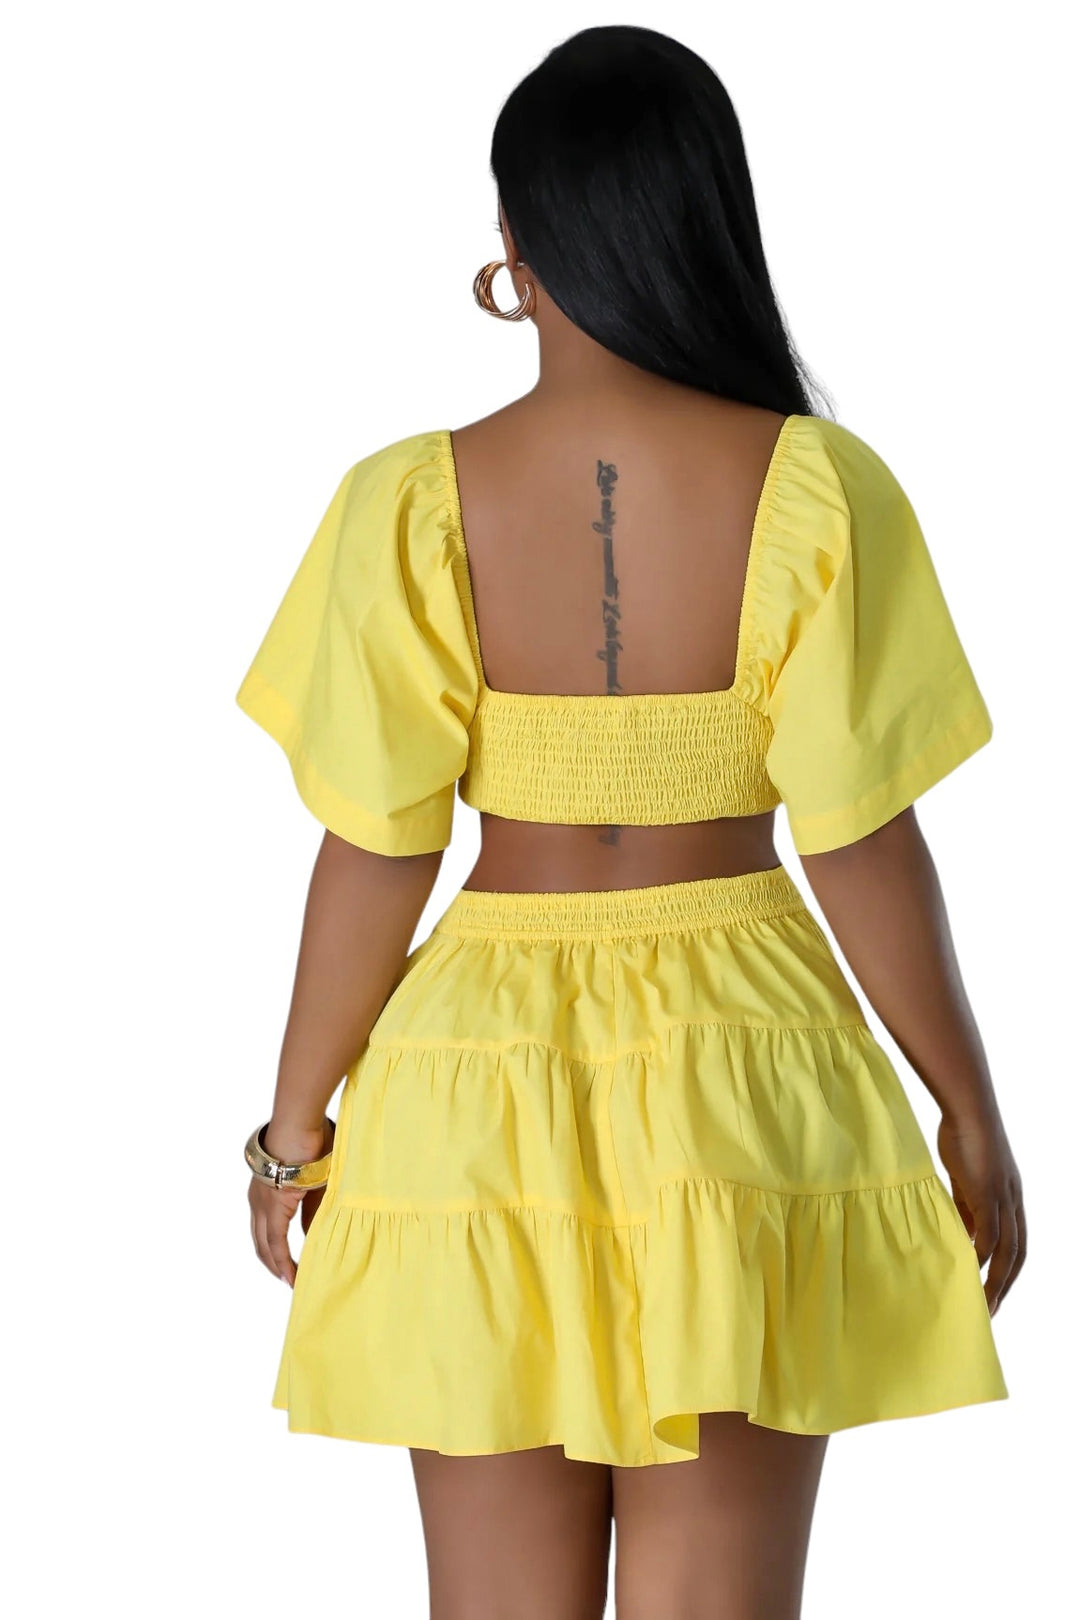 the back of a woman wearing a yellow dress